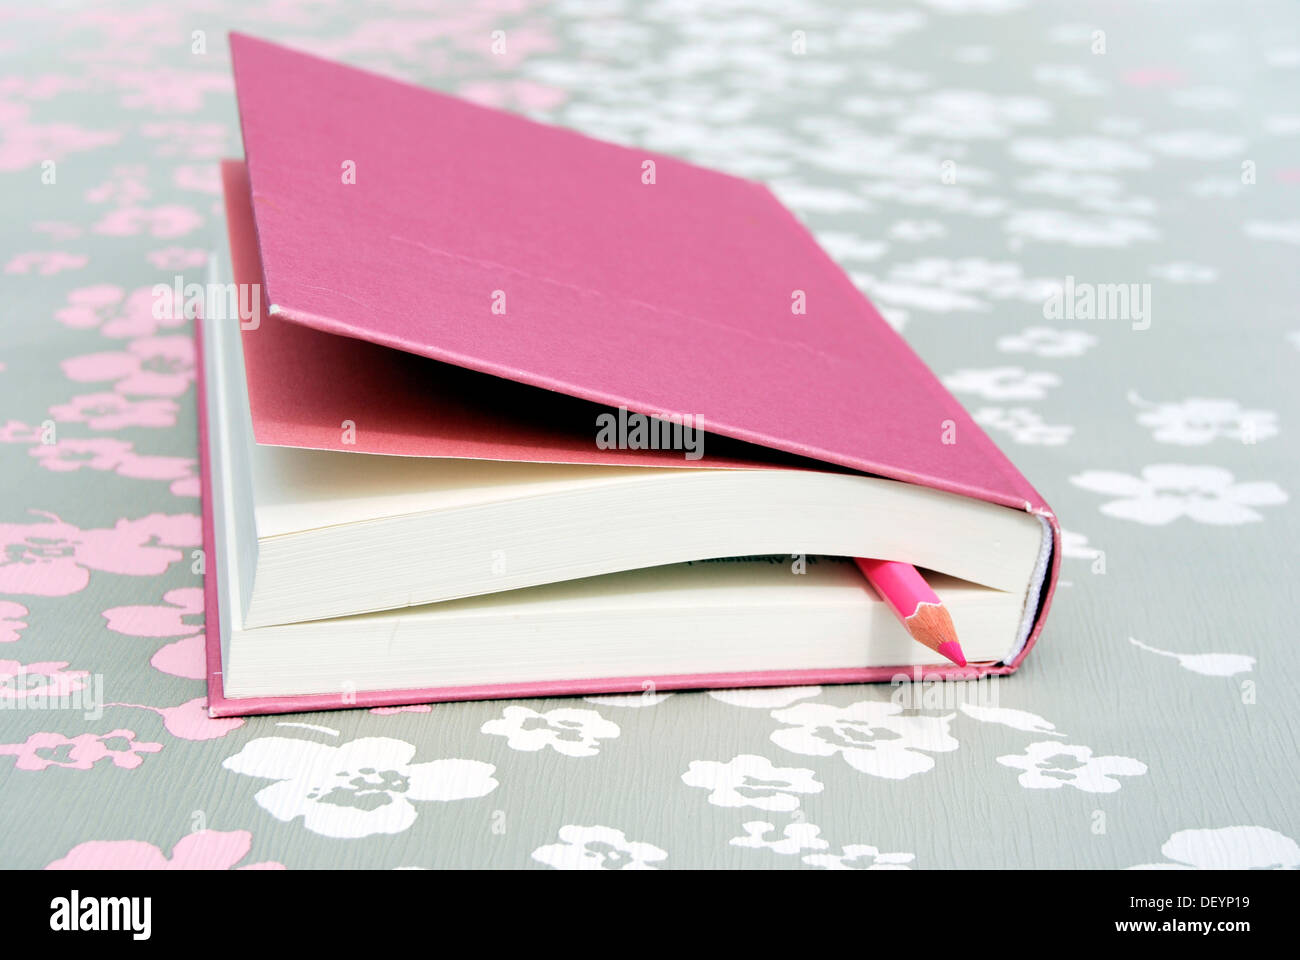 Closed pink book with pen as a bookmark, on floral design Stock Photo